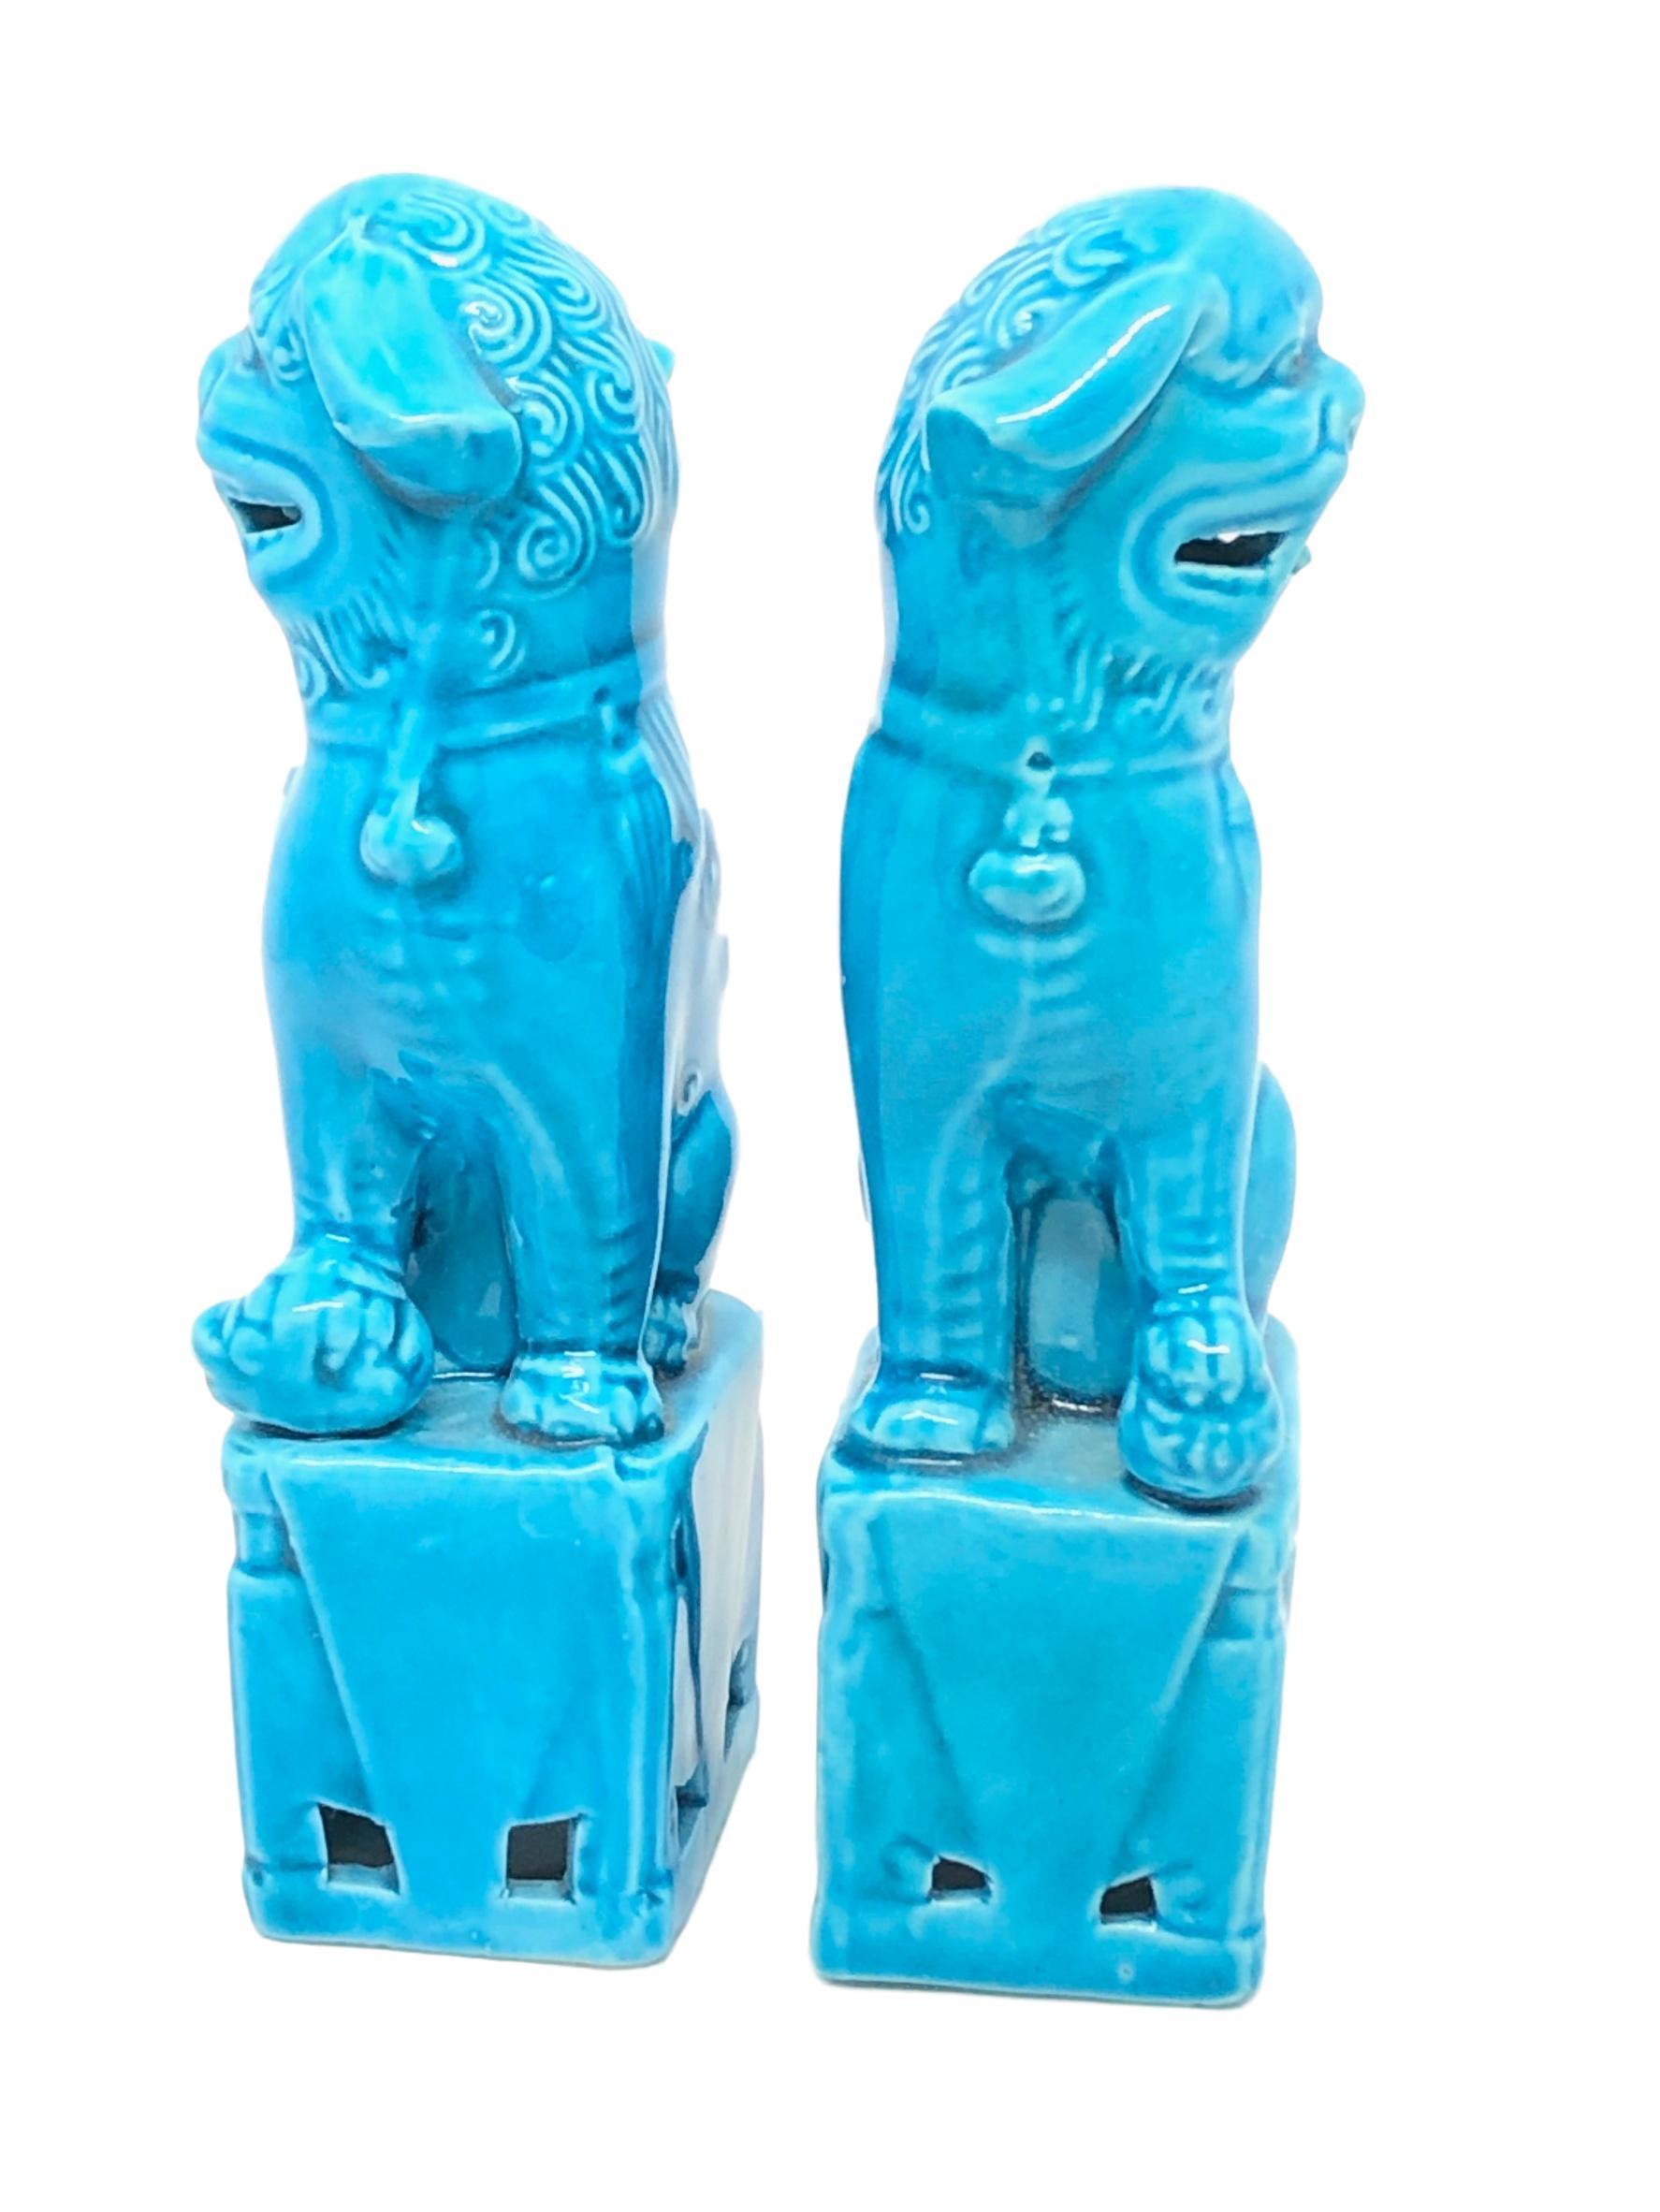 A very nice pair of vintage, mini, turquoise blue, ceramic foo dogs, circa 1980s. Excellent condition and patina; makes a fun decor item in any room!
.    